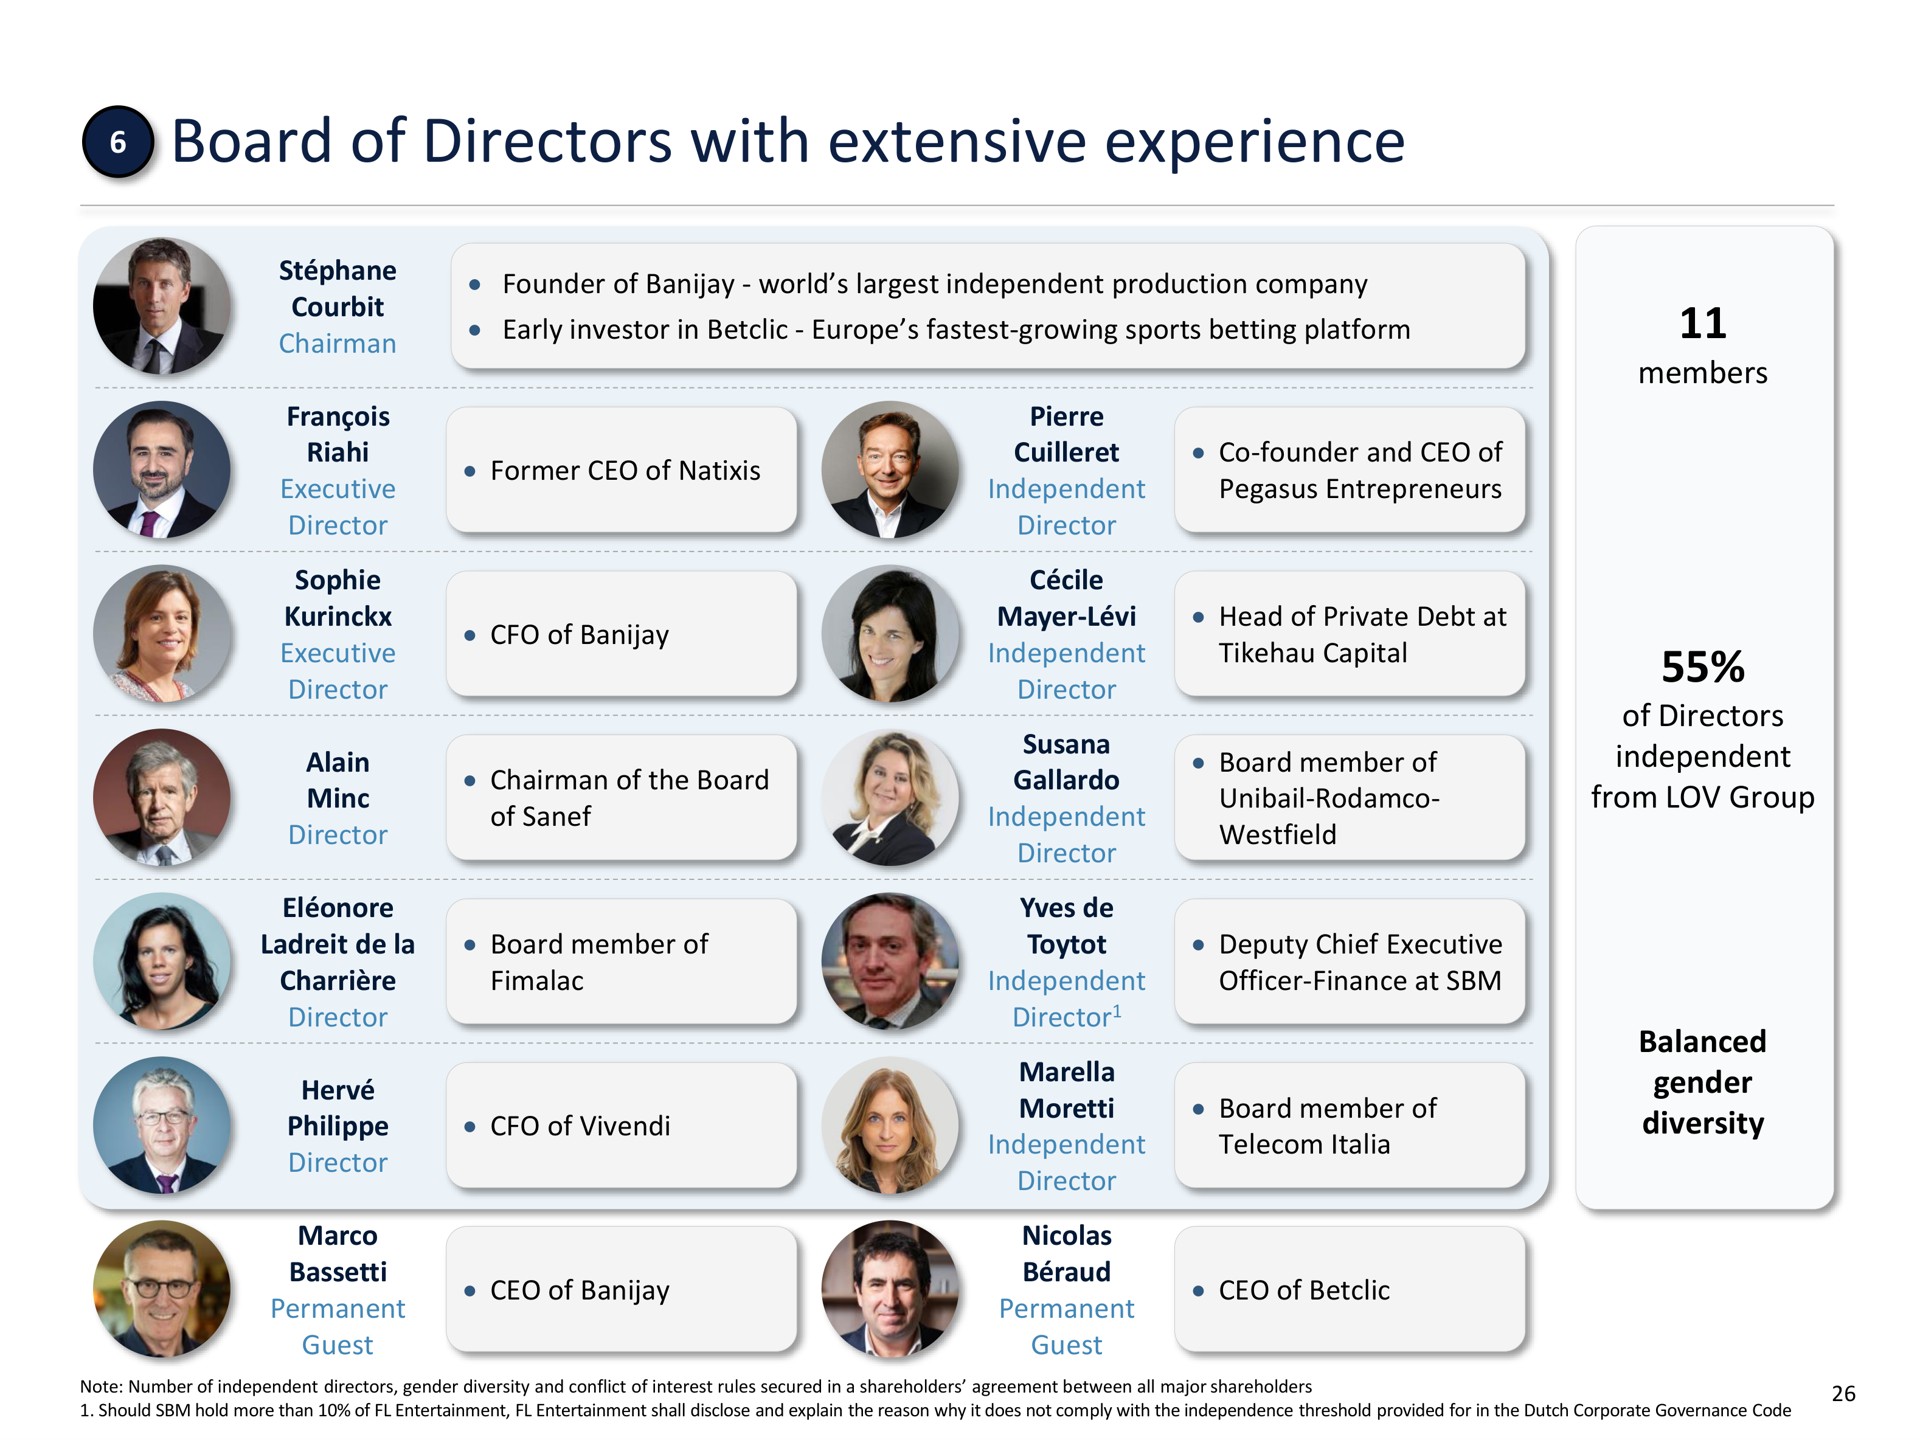 board of directors with extensive experience | FL Entertaiment